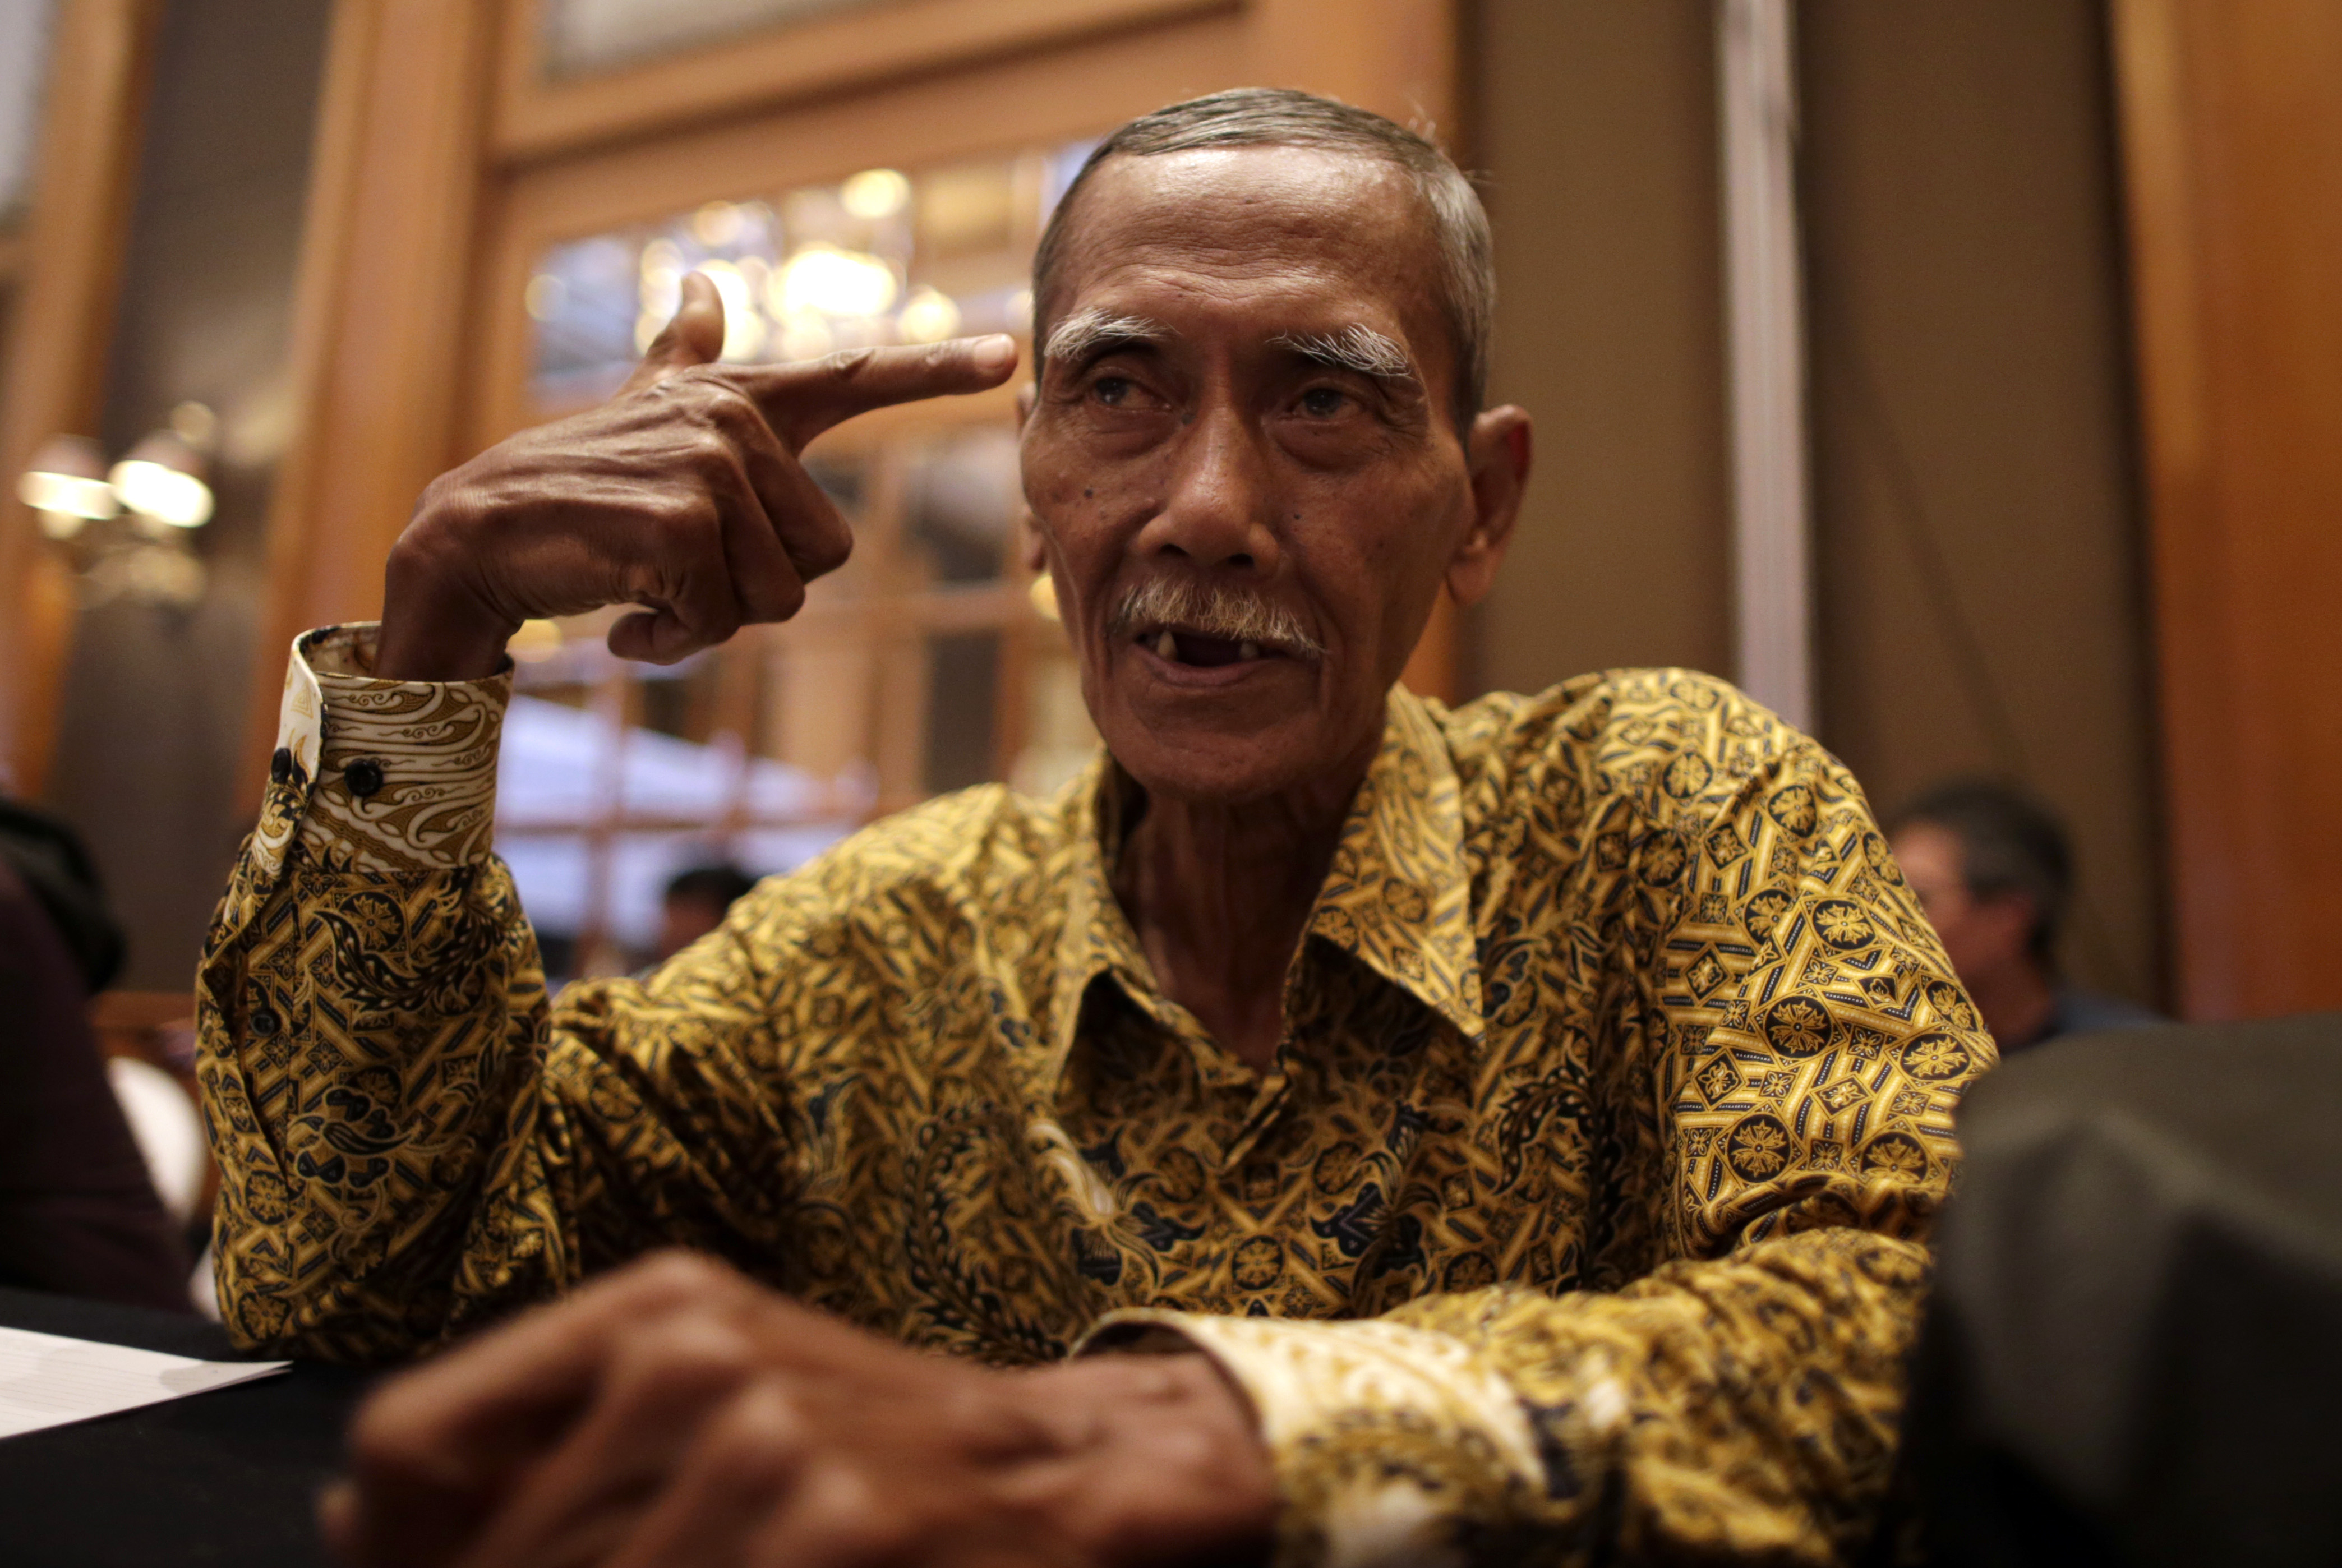 Komara, 67, who spent 100 days imprisoned without trial during the Indonesian government's anticommunist purge in 1965–66, tells his story on the sideline of a symposium on April 18, 2016 in Jakarta (Mast Irham—EPA)